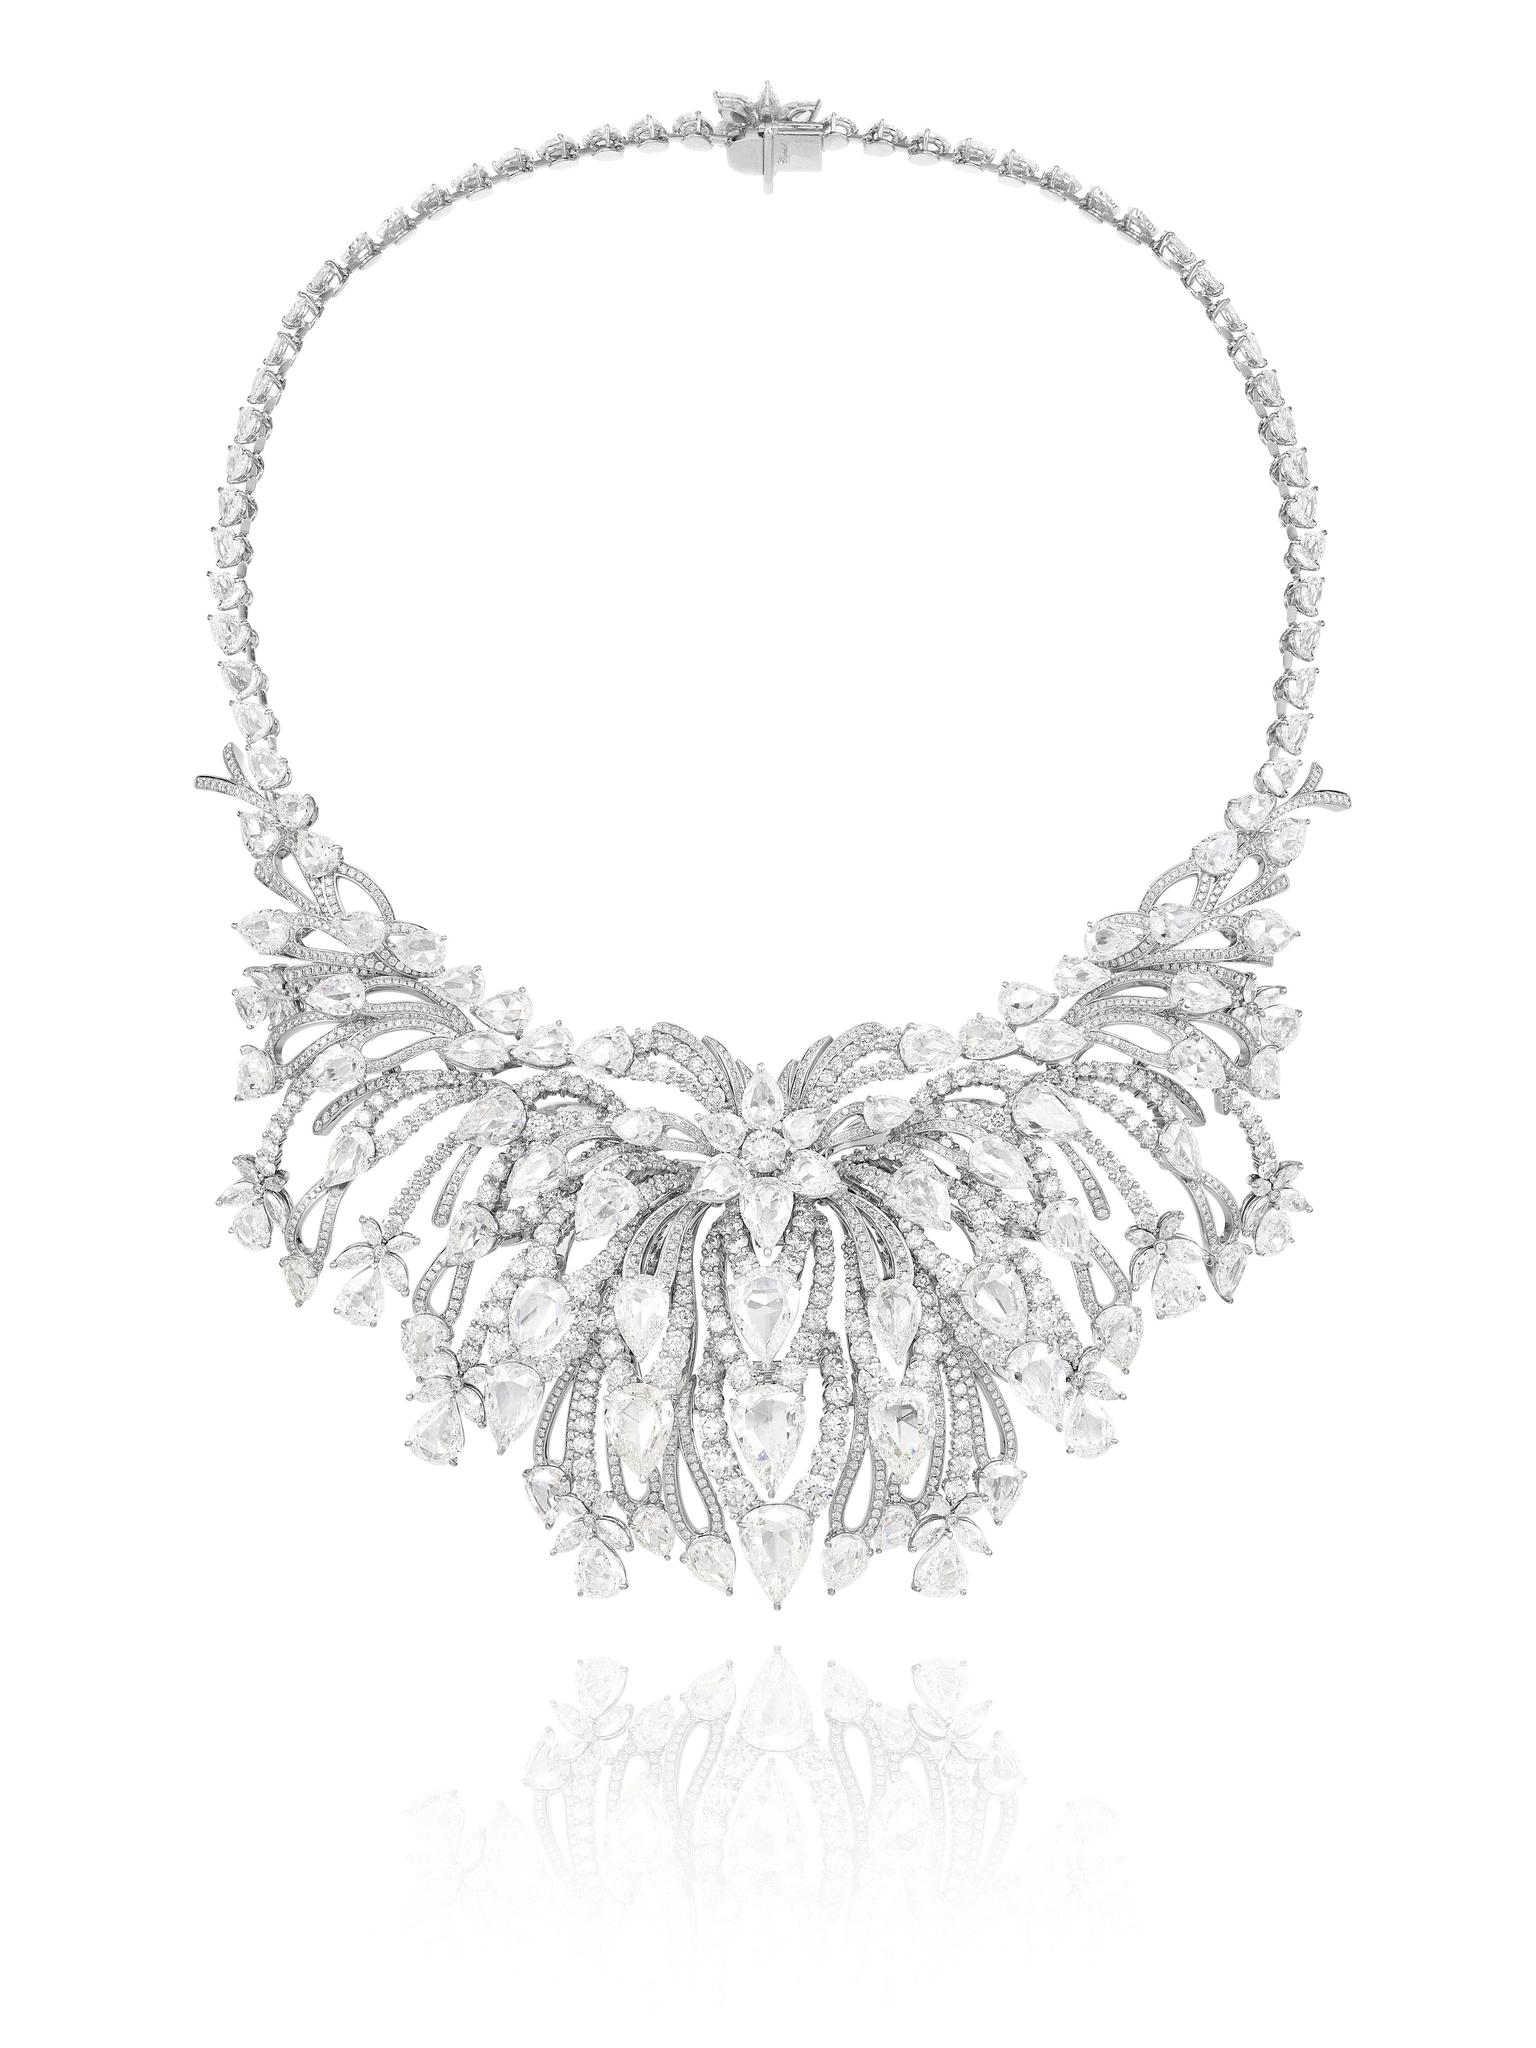 Chopard Red Carpet Collection 2014 Riviera diamond necklace